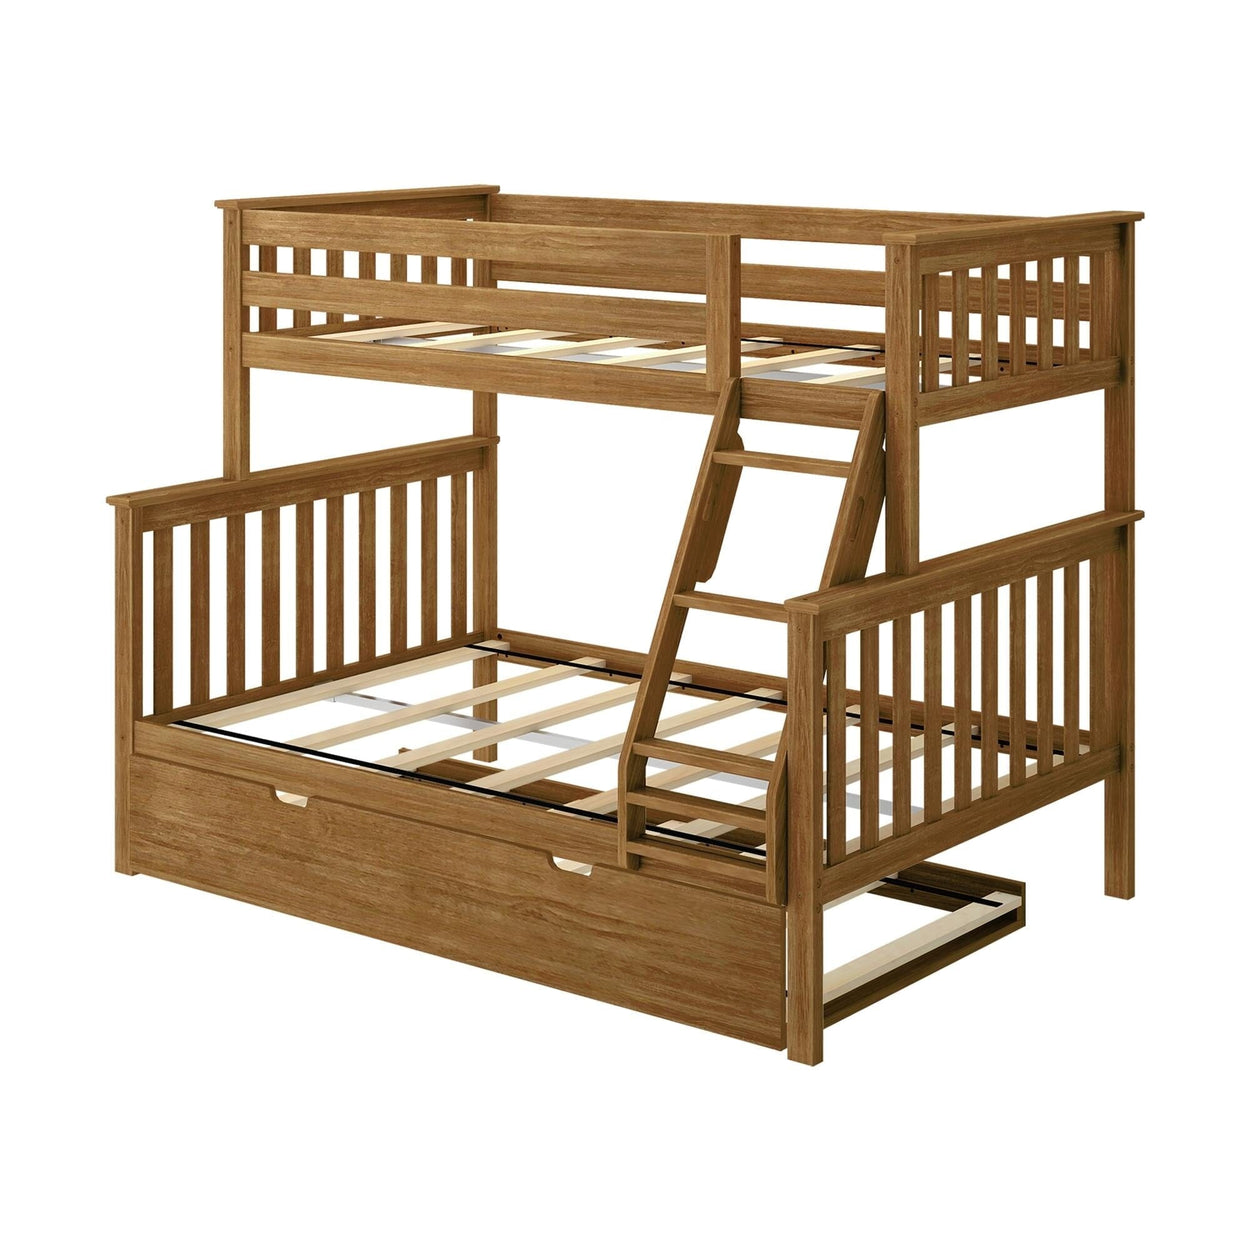 186231-007 : Bunk Beds Classic Twin over Full Bunk Bed with Trundle, Pecan